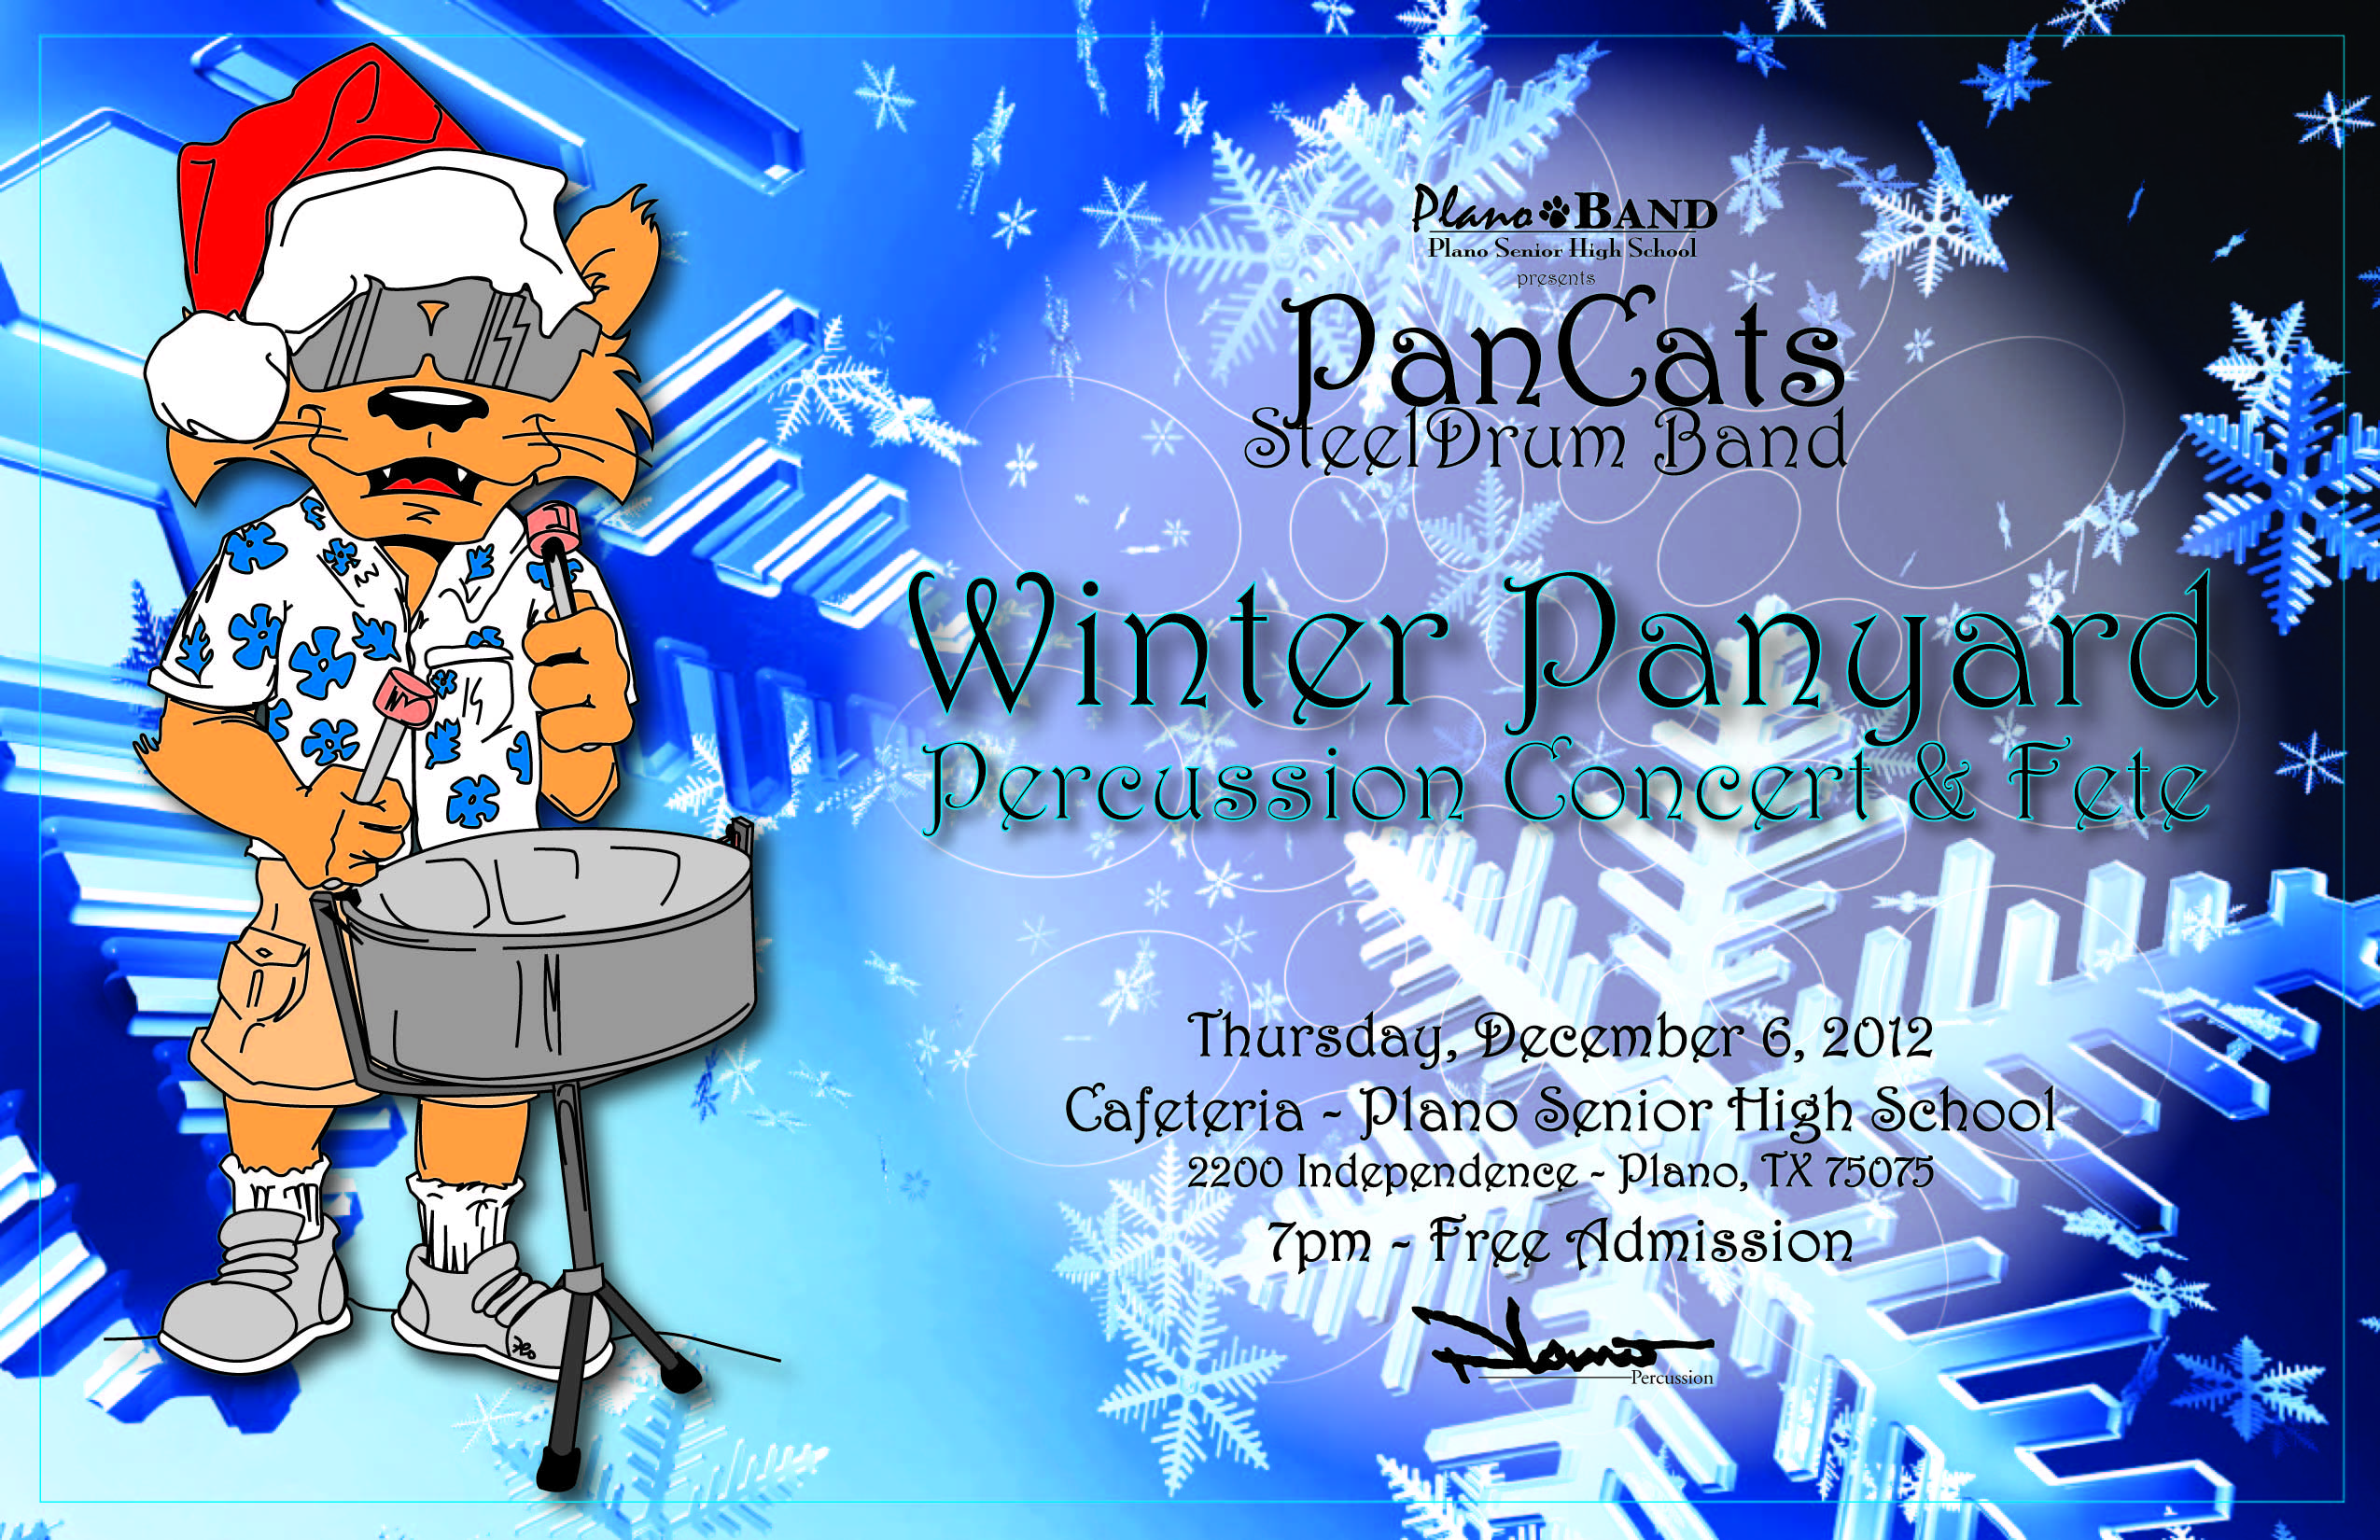 This year's Winter Panyard Percussion Concert and Fete will be on 